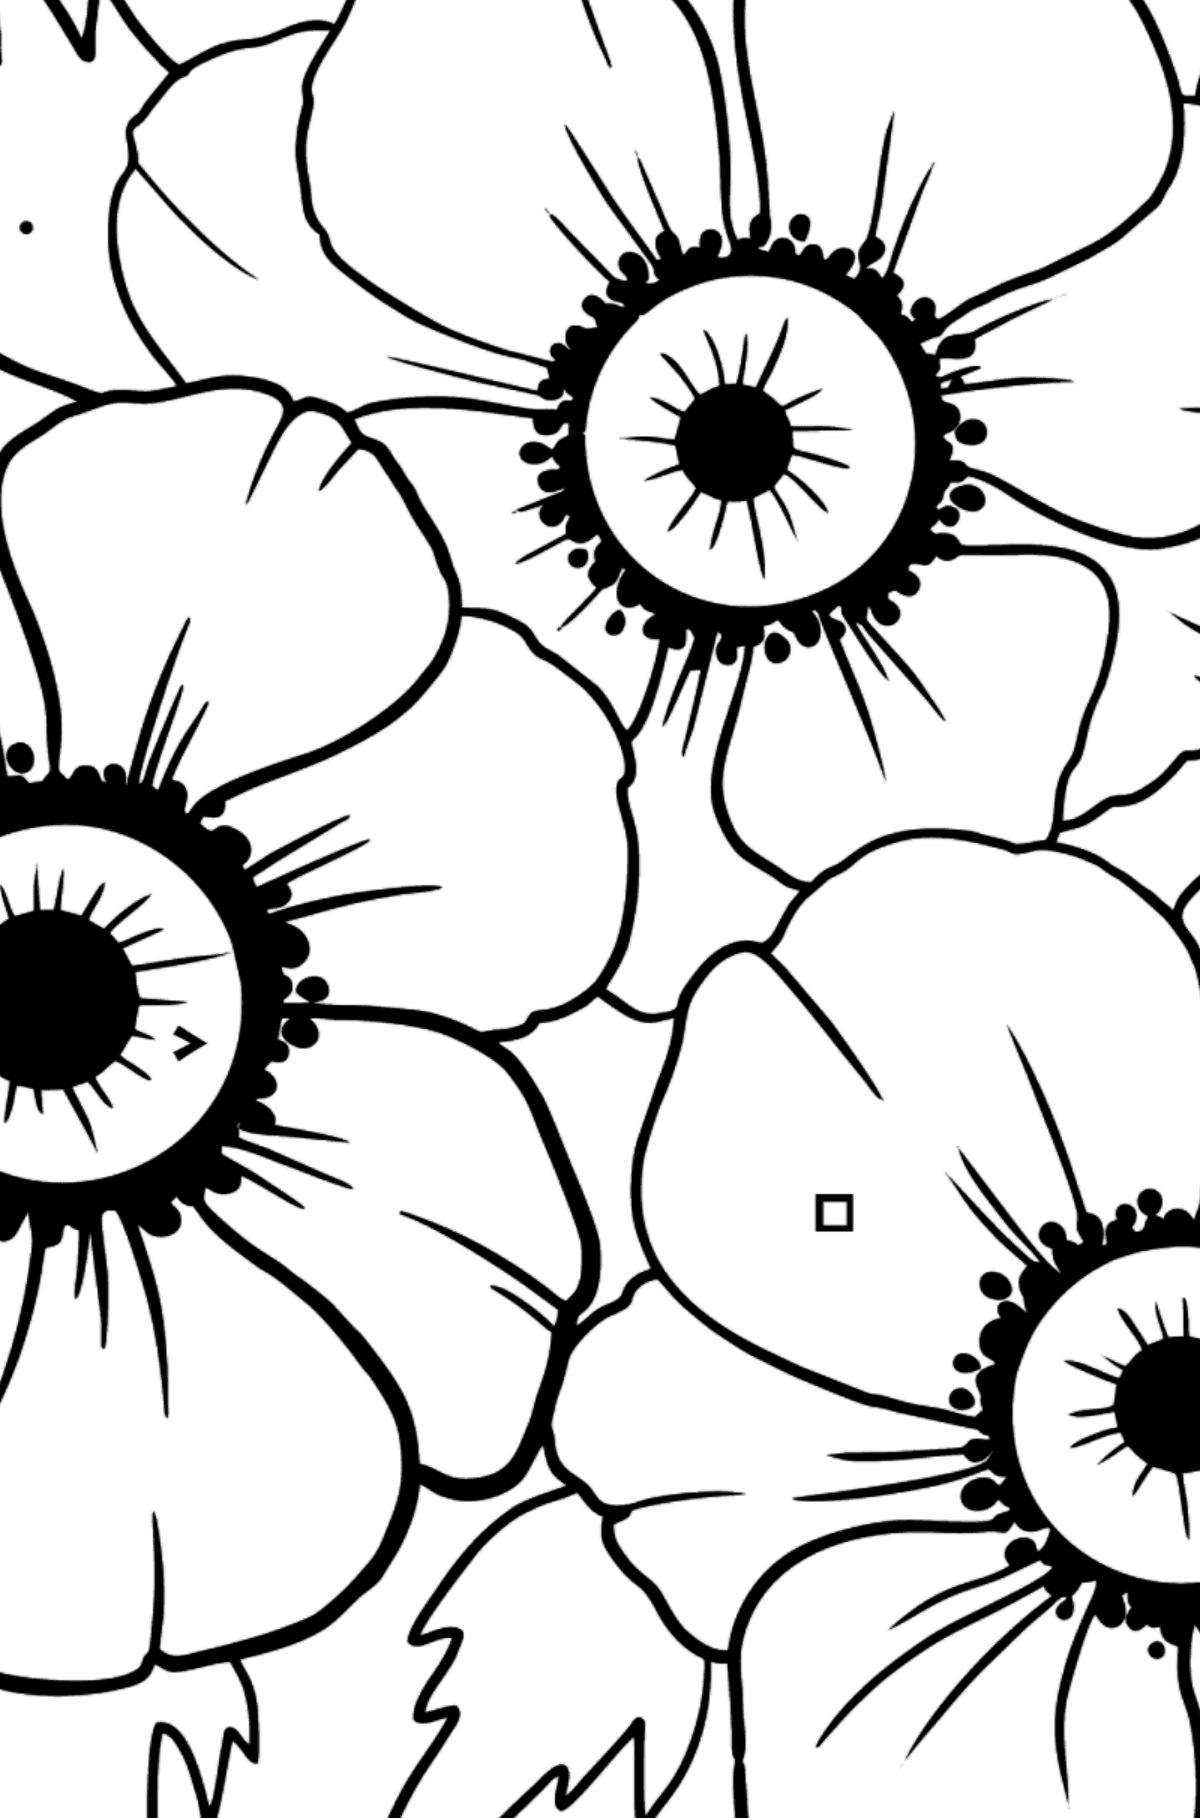 Coloring Page with big flower - A Red and Pink Anemone Coronaria - Coloring by Symbols for Kids